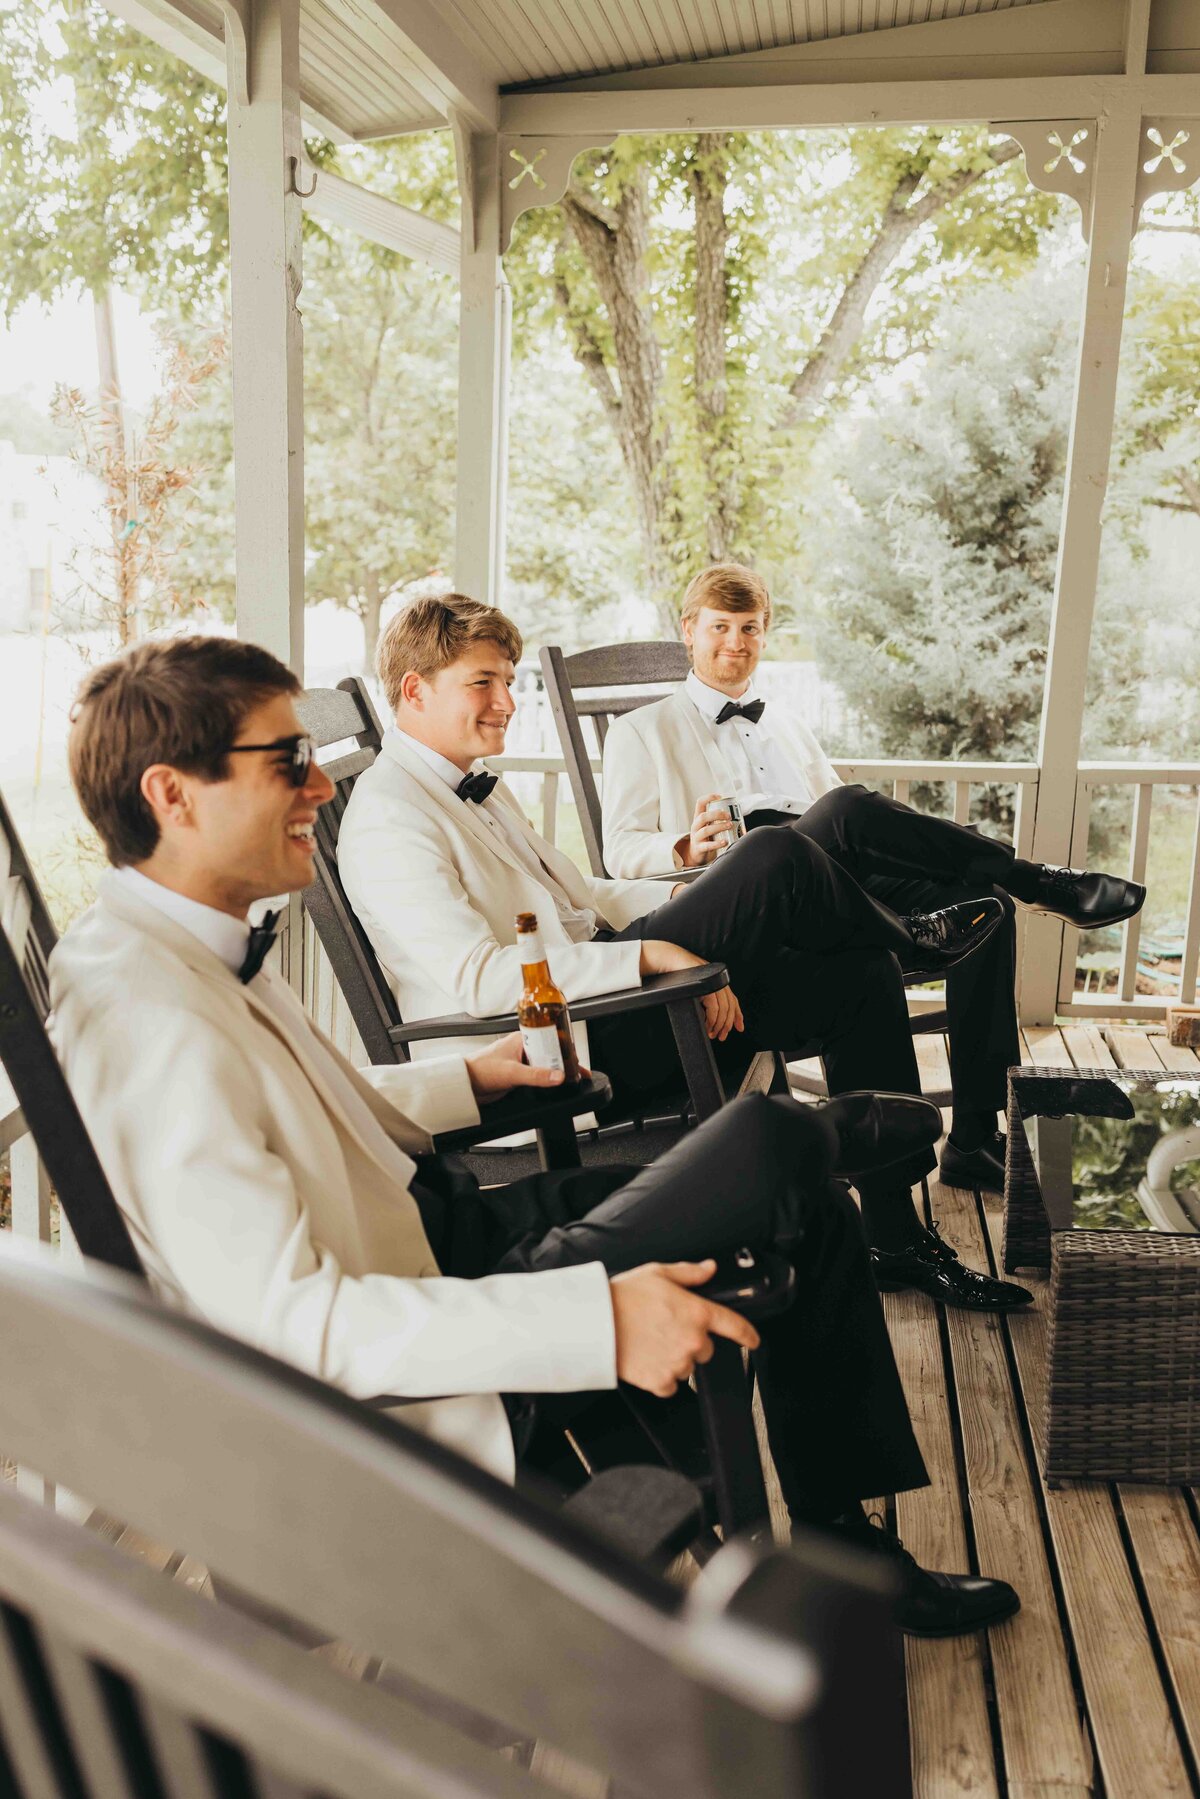 groomsmen sit and chat on the patio before the big ceremony